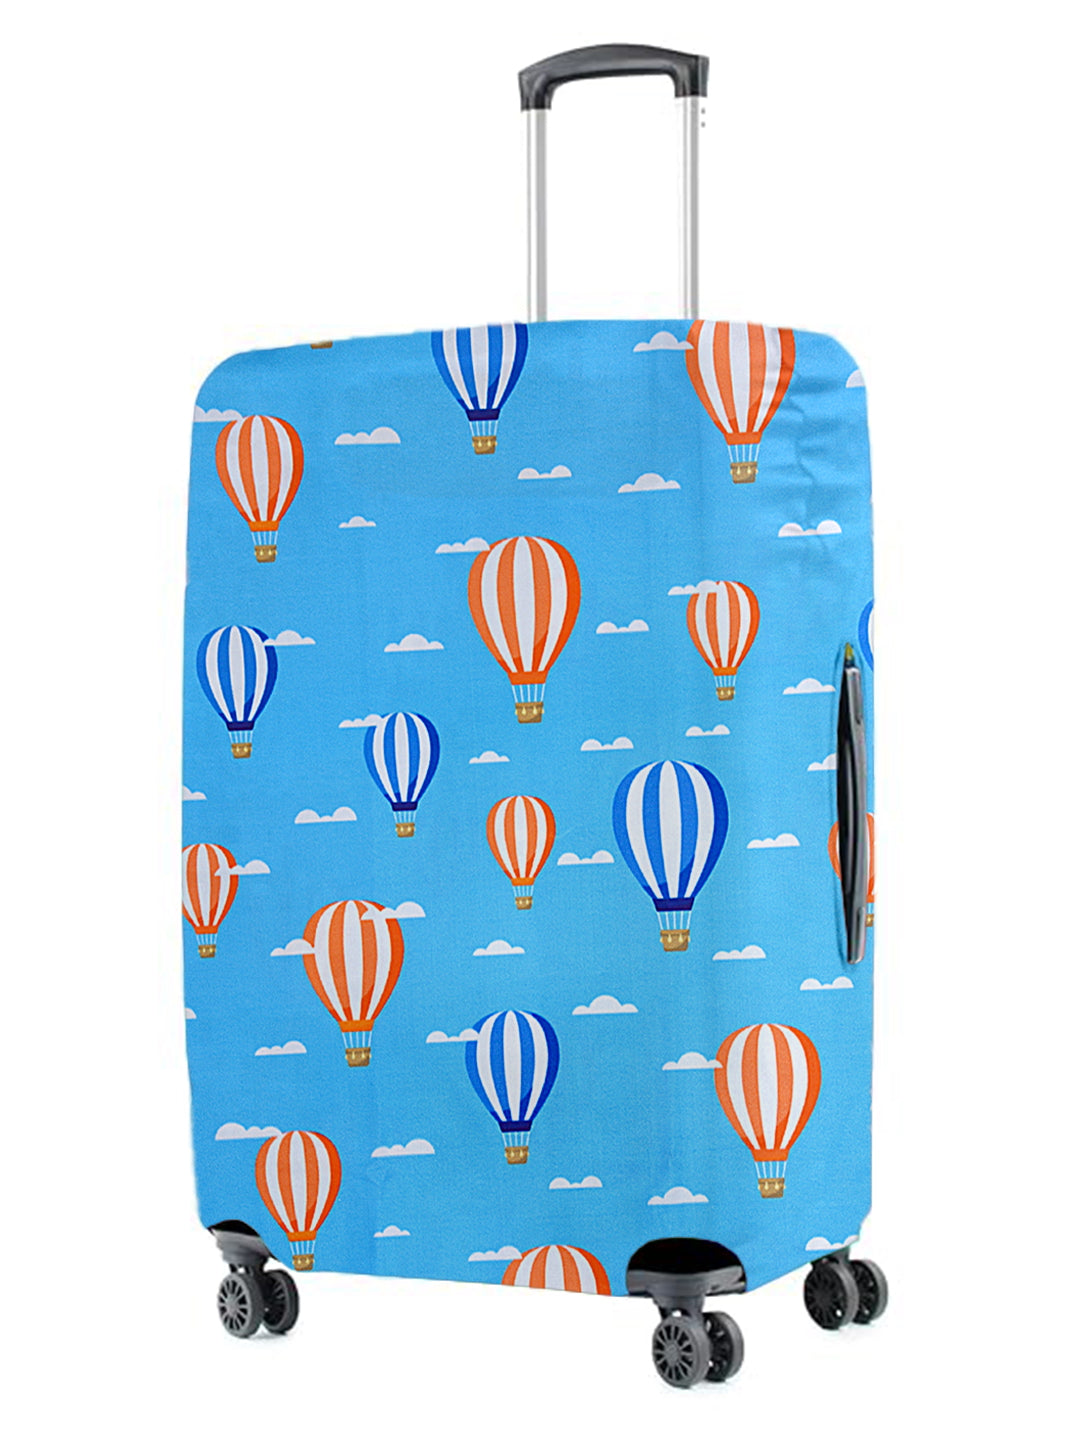 Stretchable Printed Protective Luggage Bag Cover Small- Light Blue